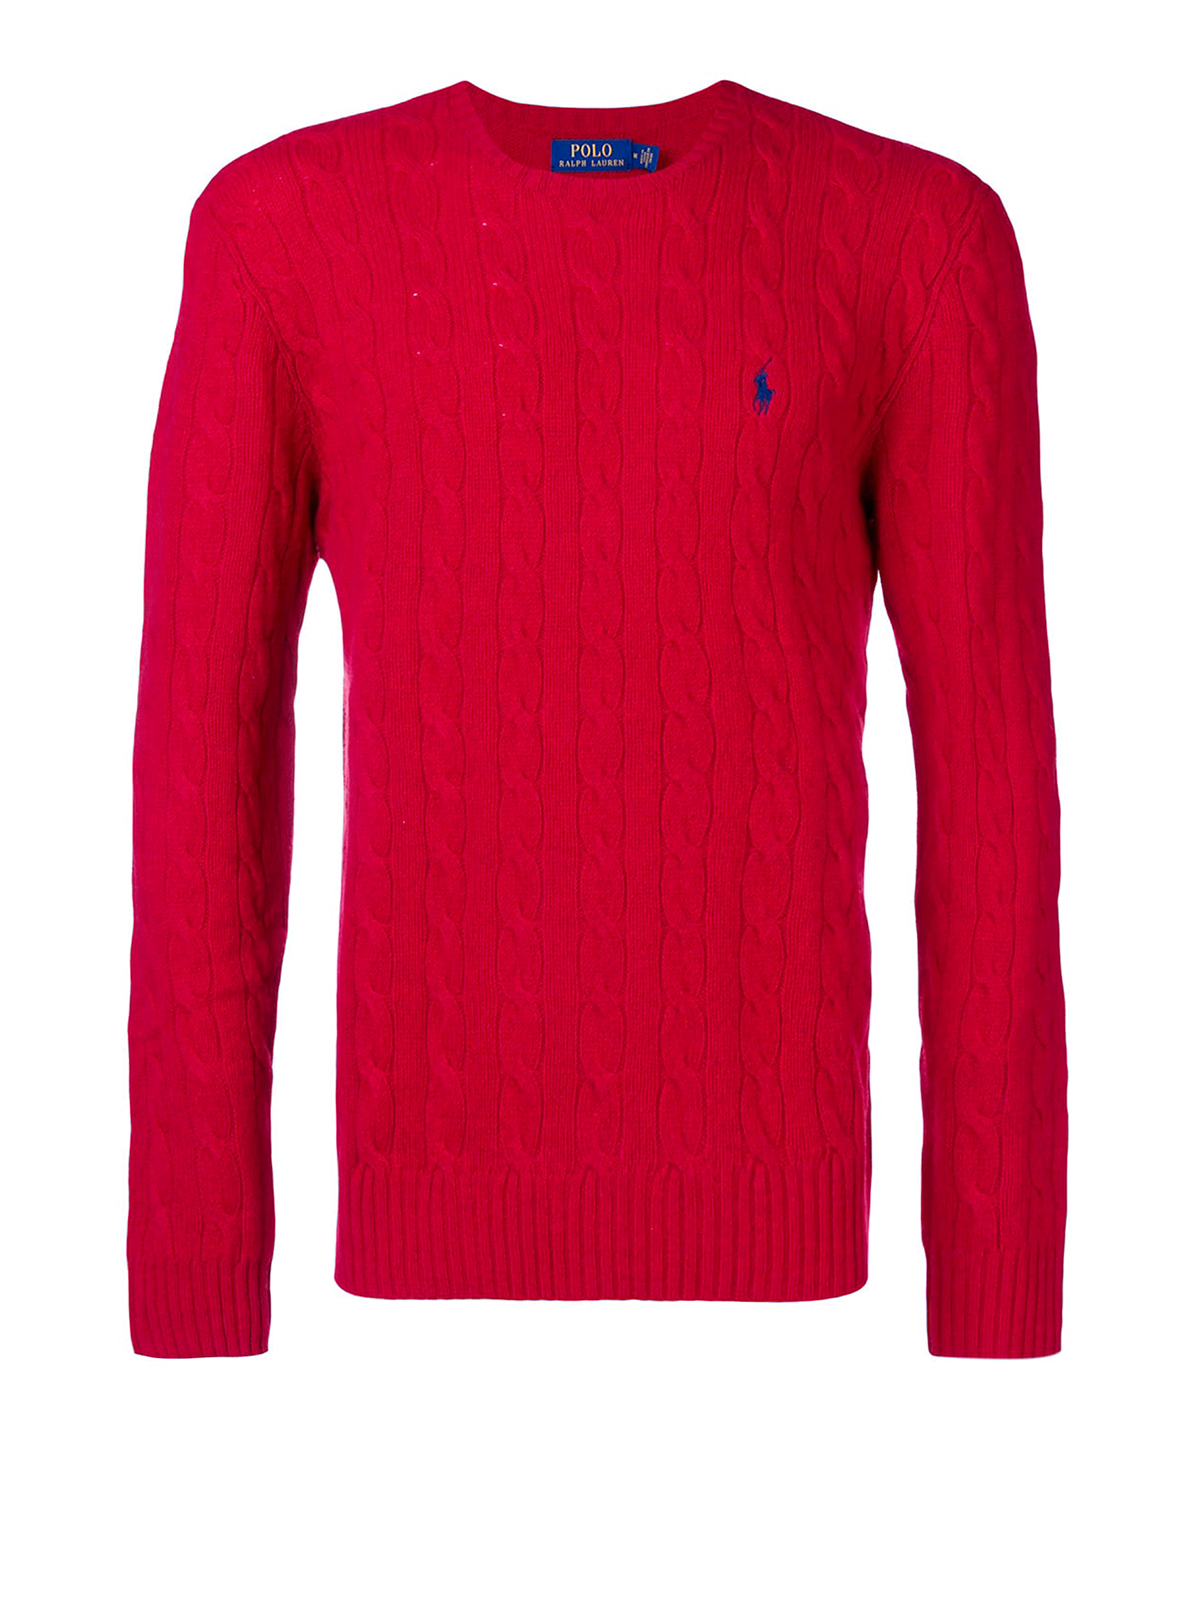 Migración Perth Blackborough Londres Crew necks Polo Ralph Lauren - Red cable knit wool and cashmere sweater -  710719546004